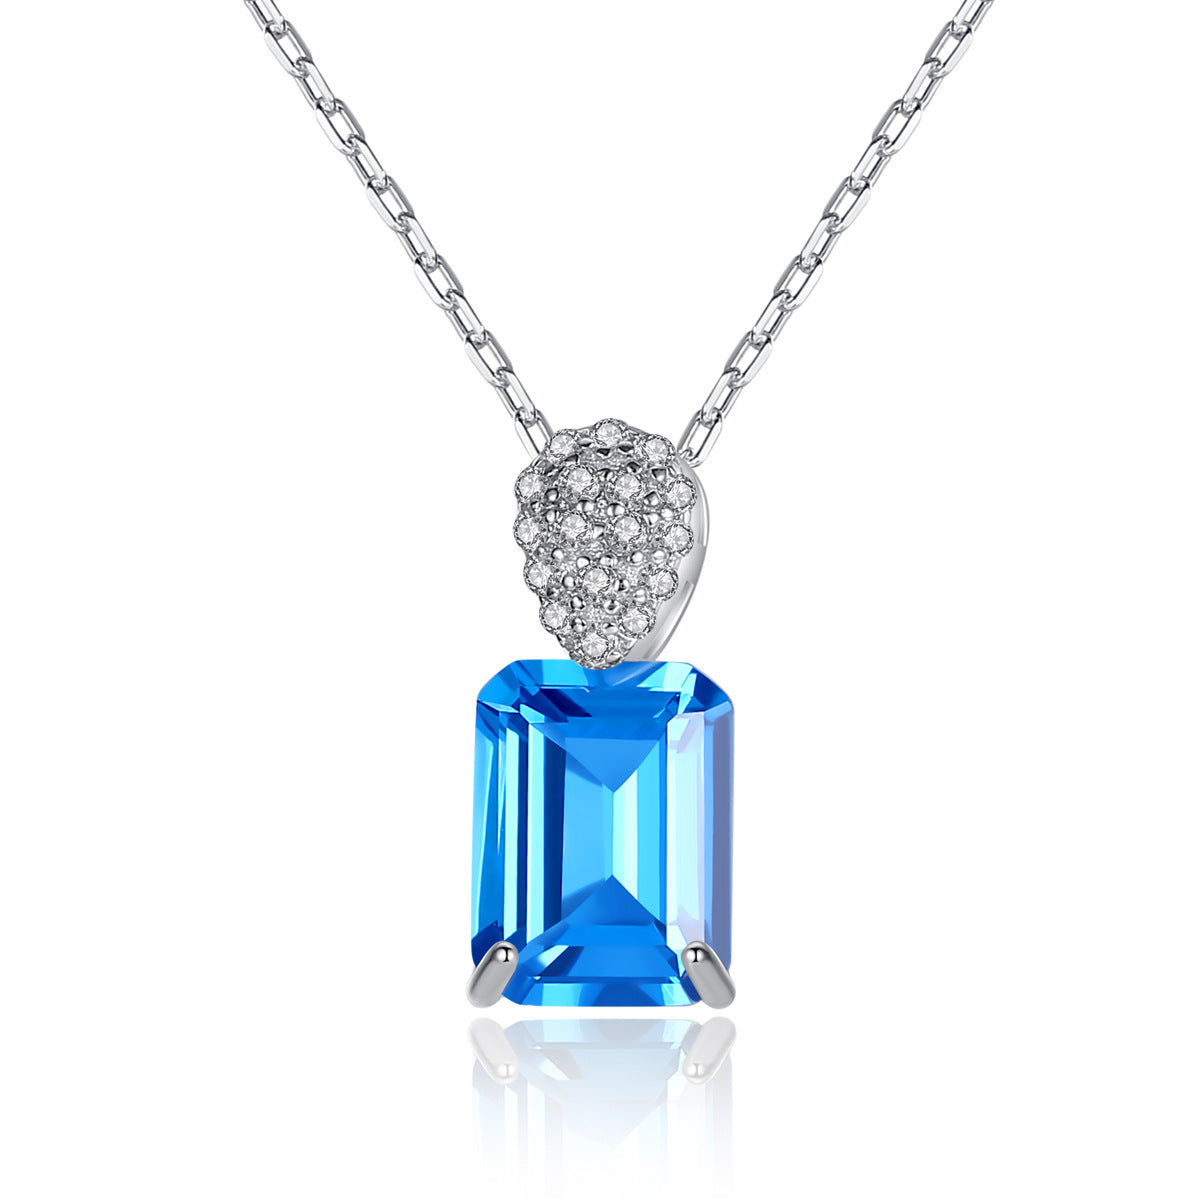 Gemstonely- Ins Style Creativity: S925 Silver Lock Necklace with Square Synthetic Cubic Zirconia Pendant and Blue Gemstone for Women